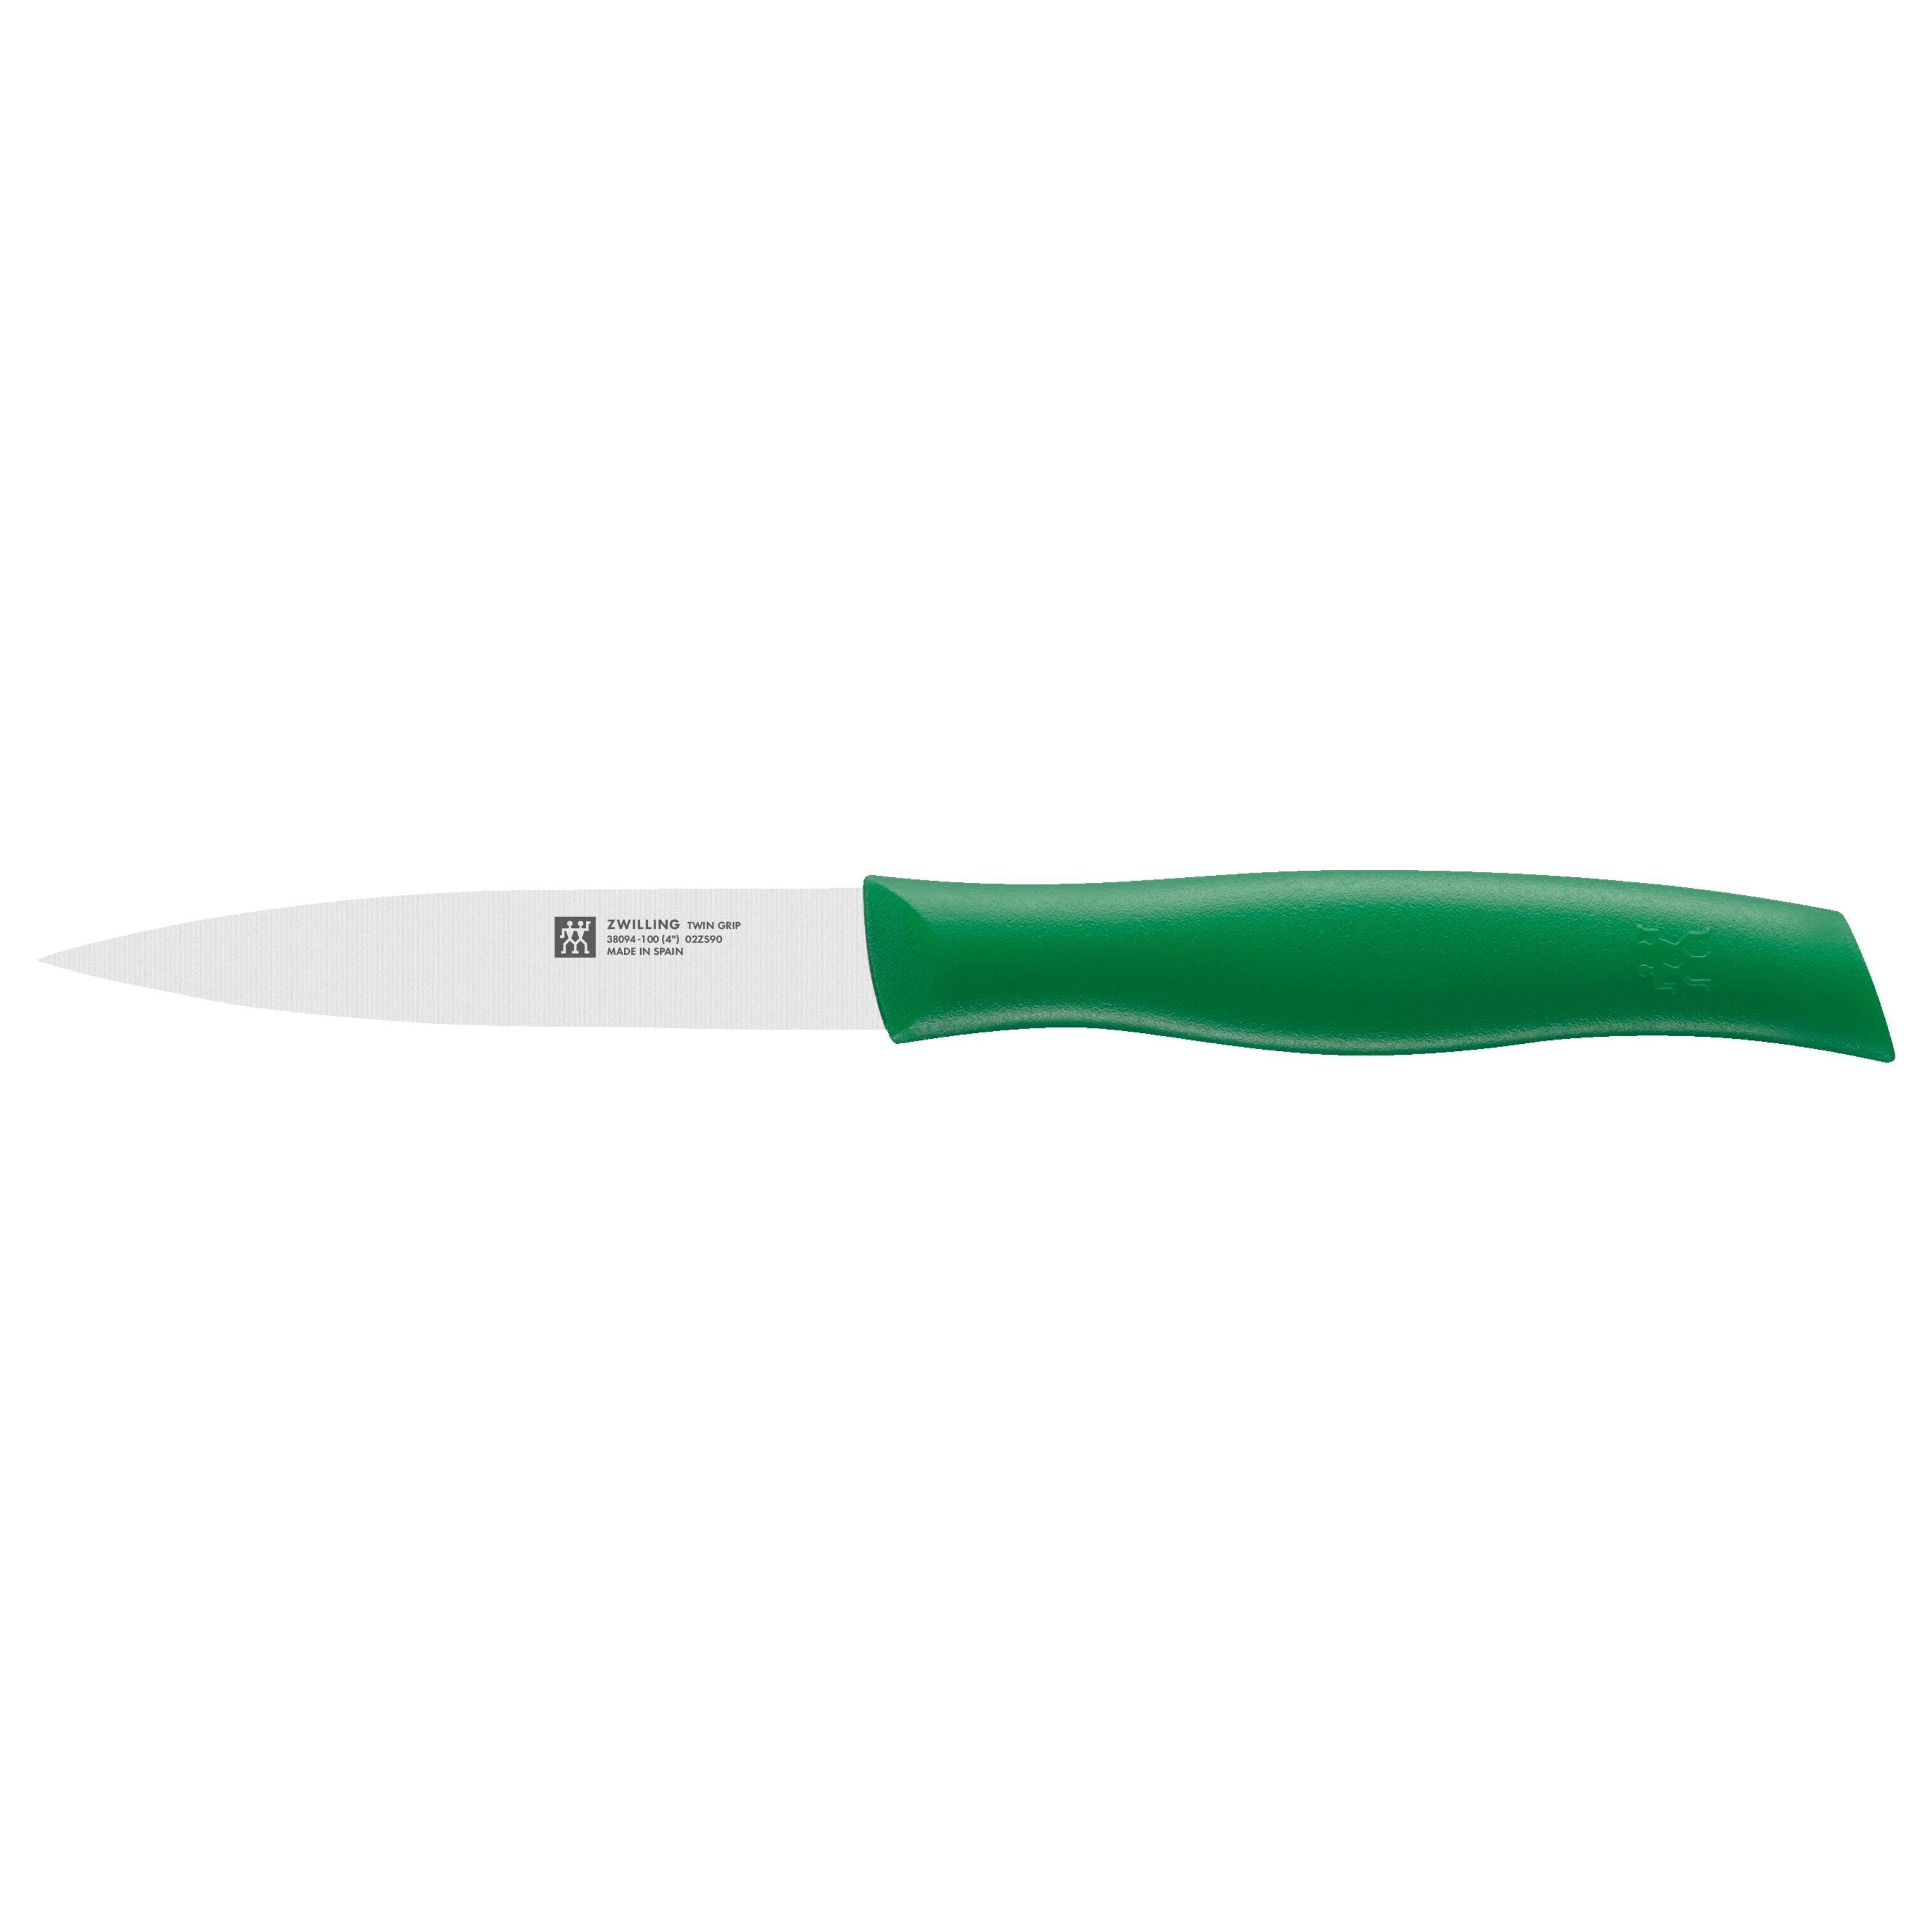 Zwilling Now S 1009647 paring knife, 10 cm  Advantageously shopping at